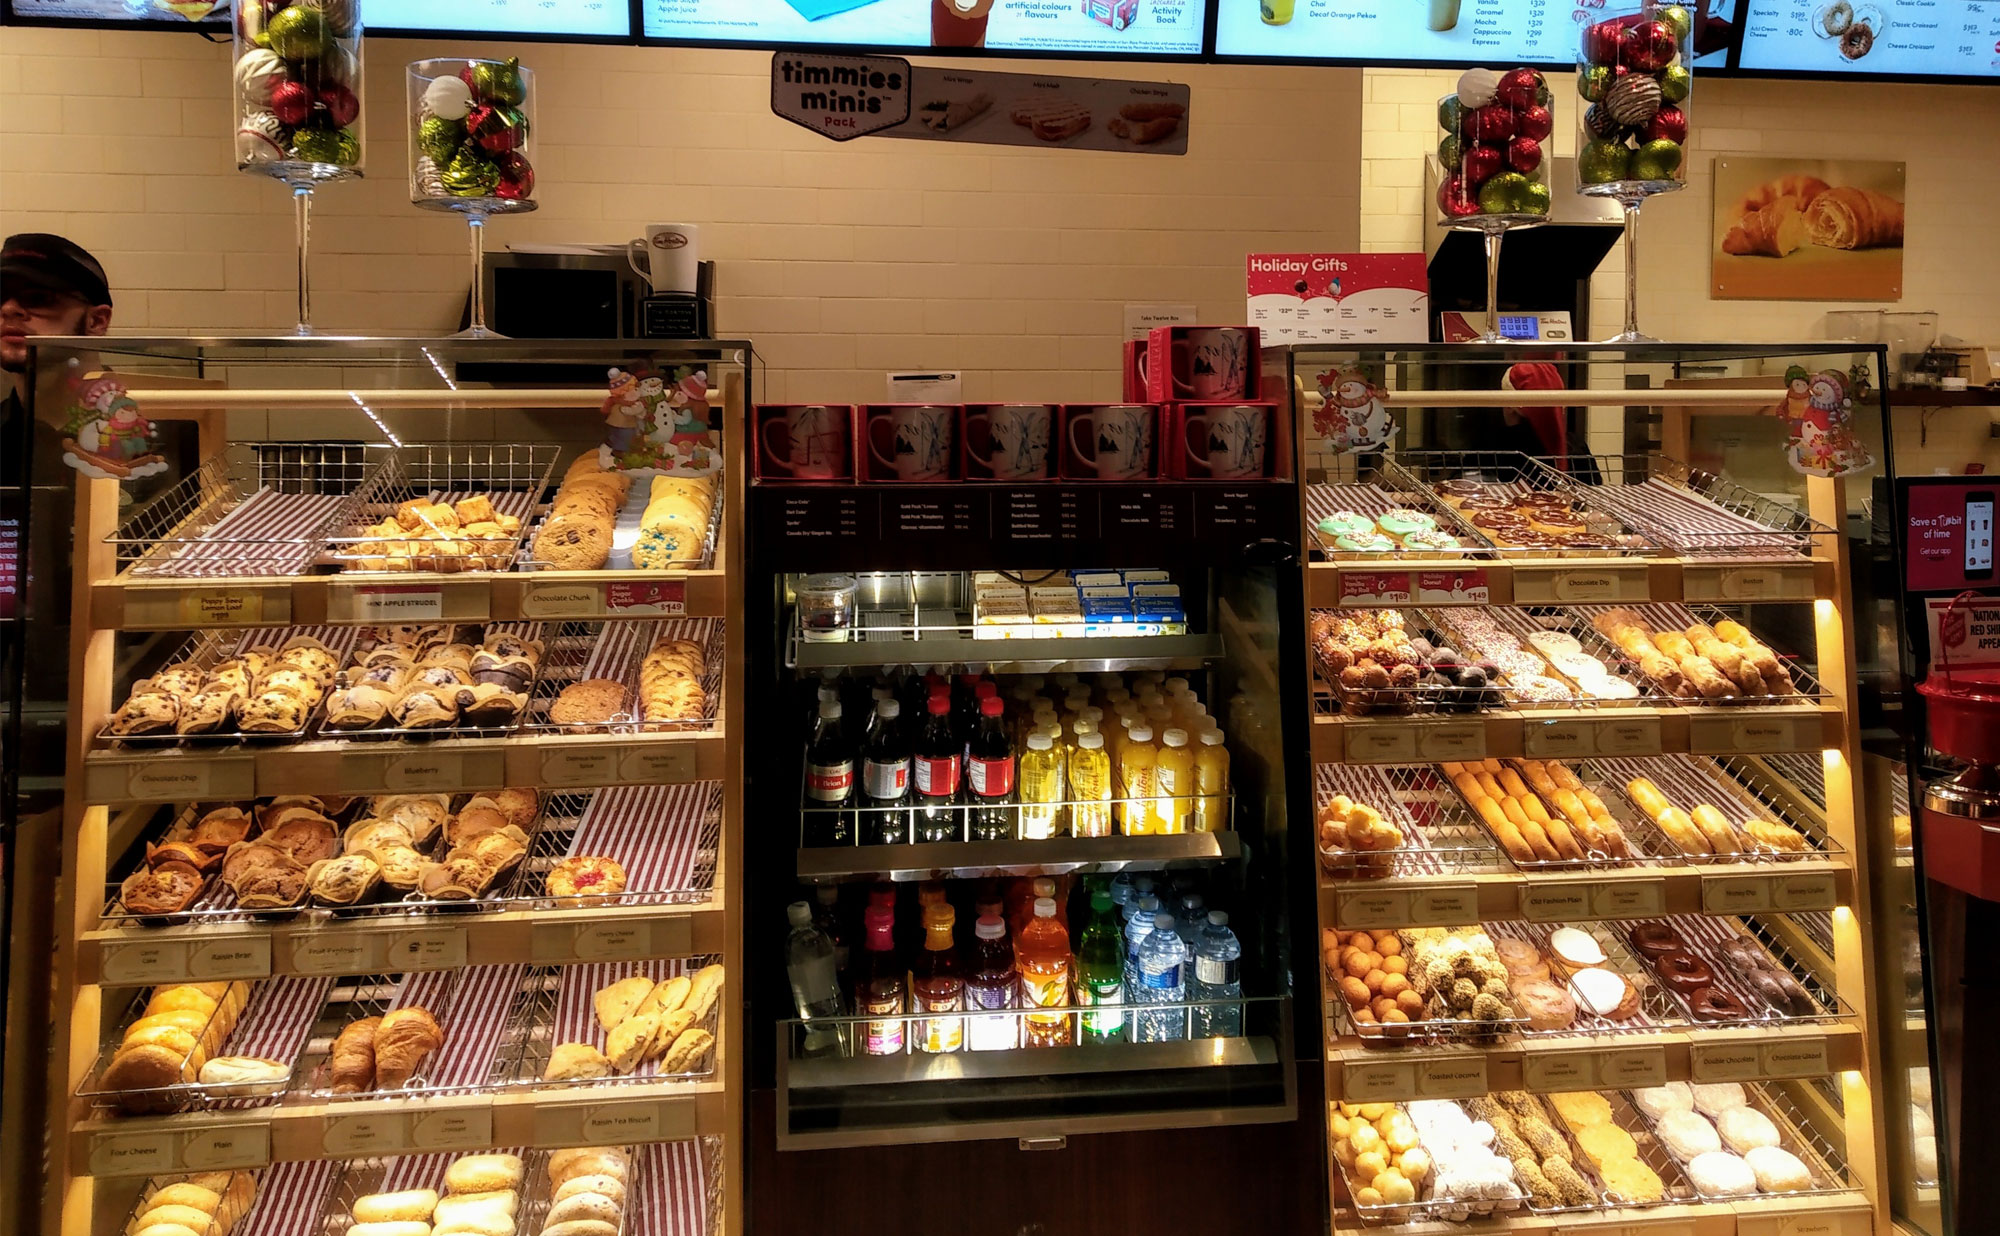 A display of pastries and drinks in a Tim Hortons store.